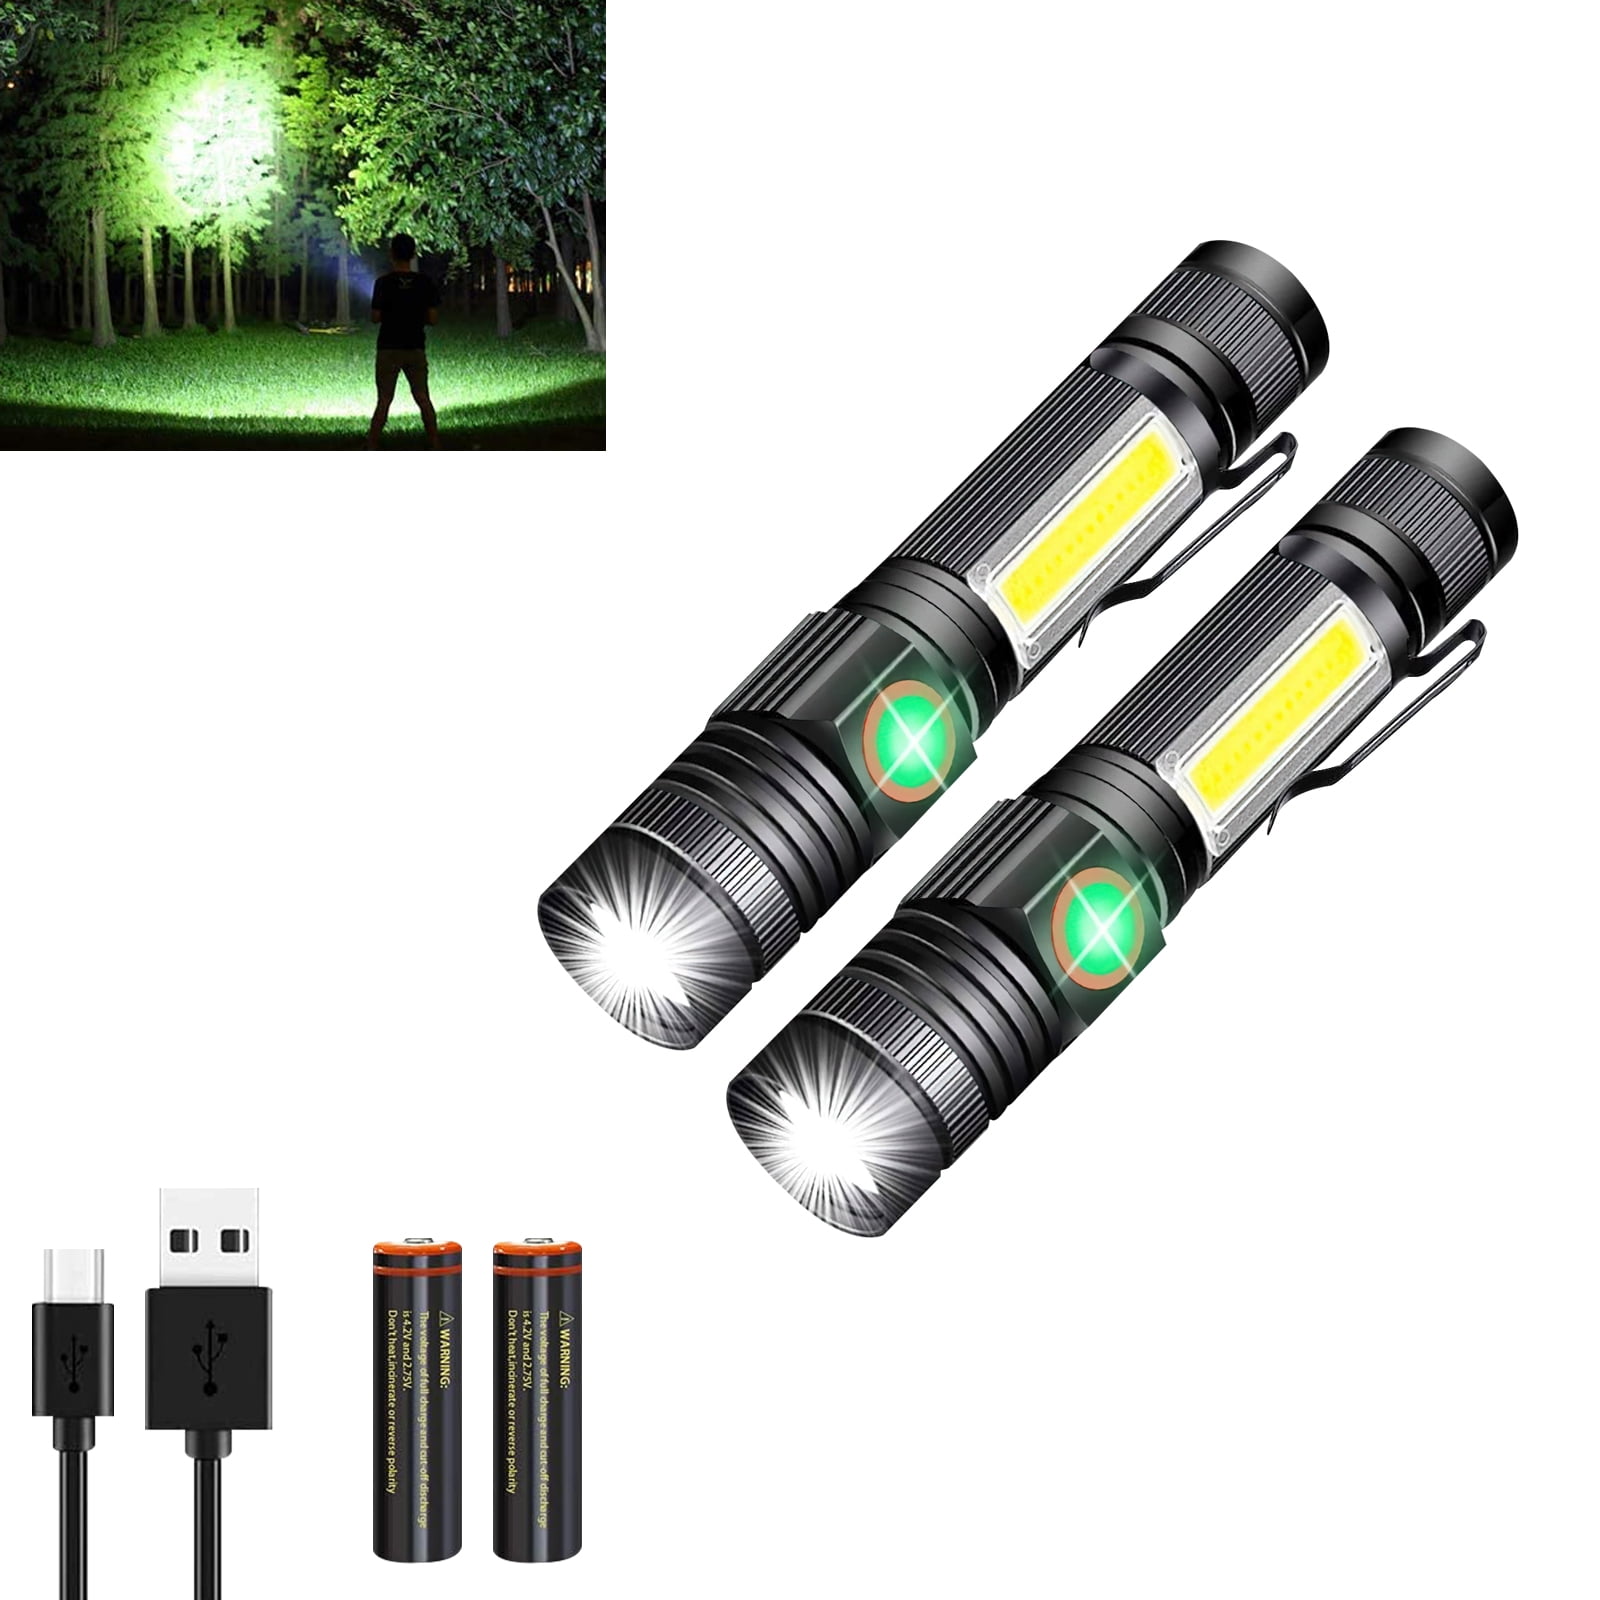 50000Lumens Zoomable Tactical LED 18650 Strobe Flashlight Torch Lamp Light Camp 